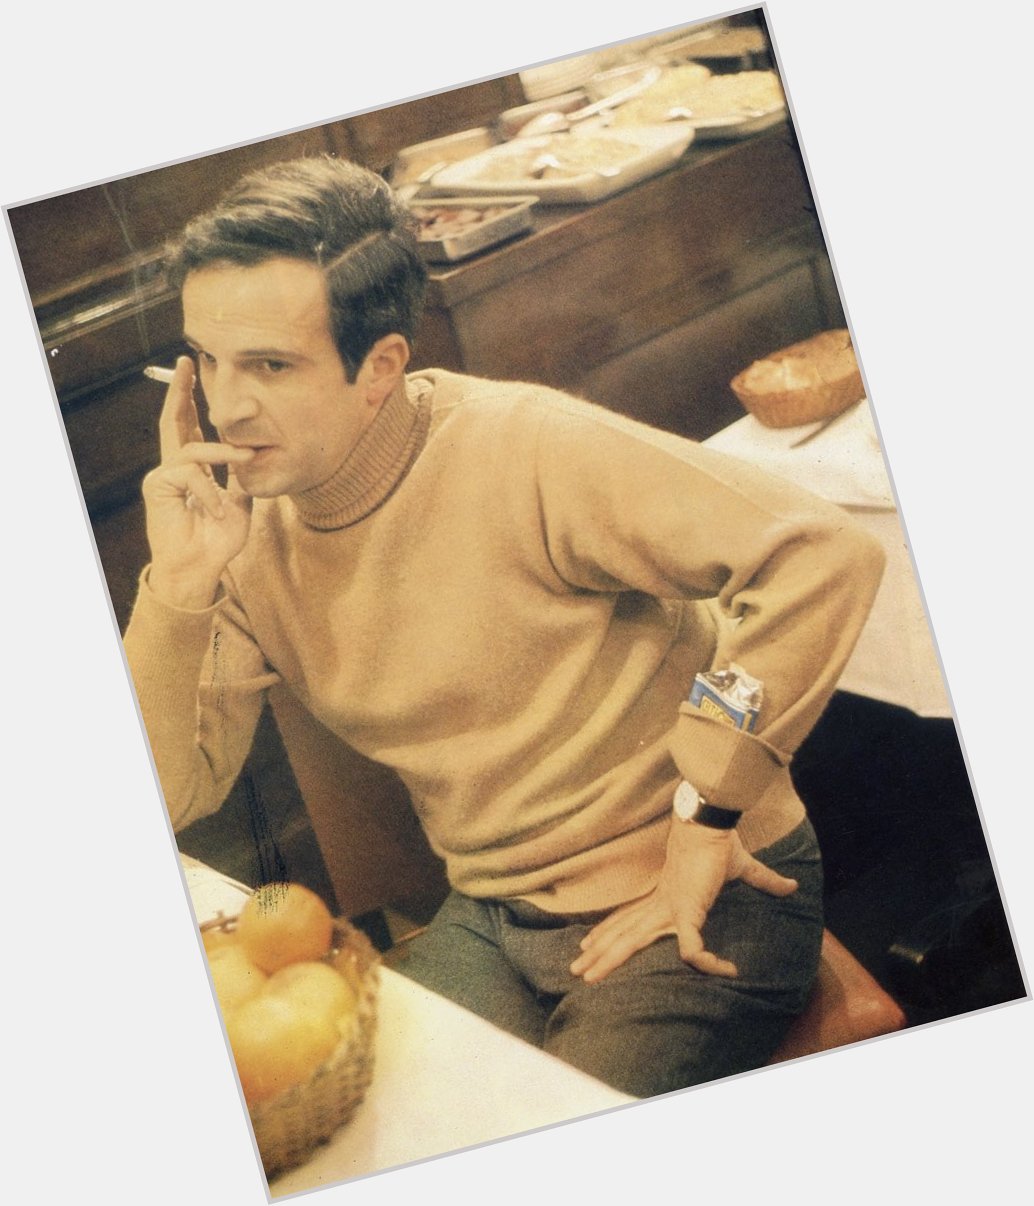 Happy Birthday François Truffaut! Smoking a cig in your honor today 